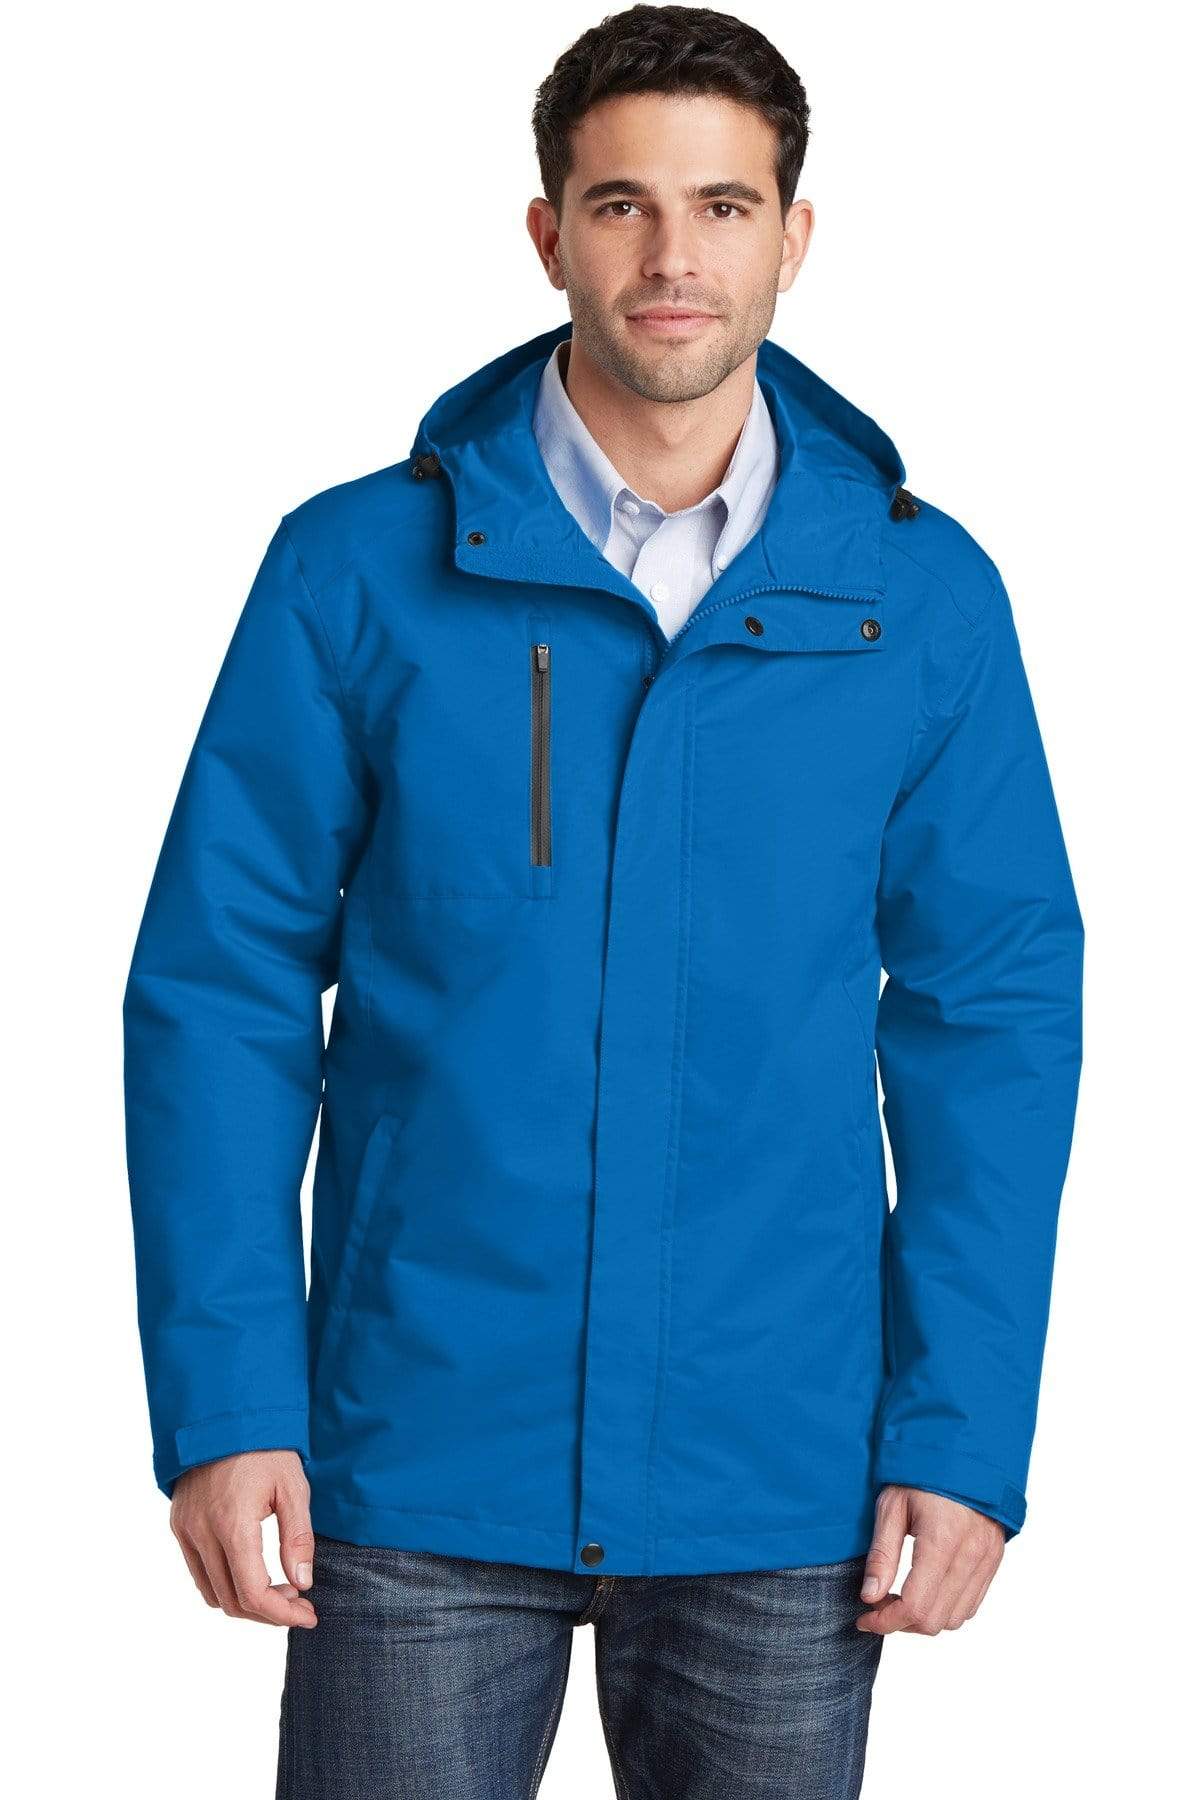 Port Authority All-Conditions Jacket J33116991